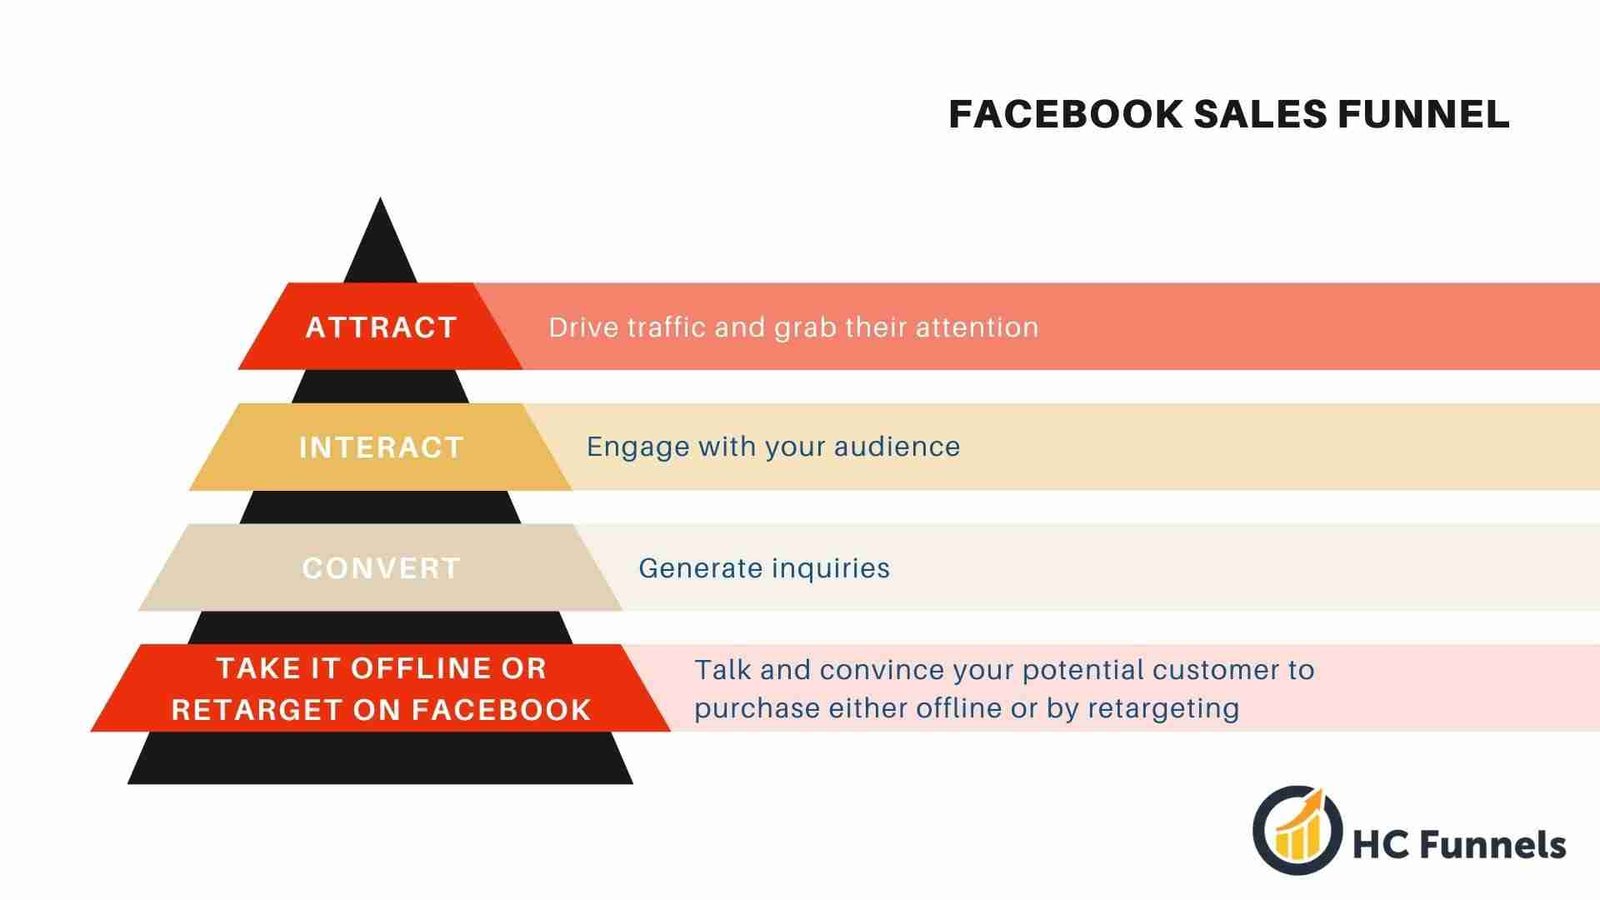 Facebook Sales Funnel System based on the traditional customer journey